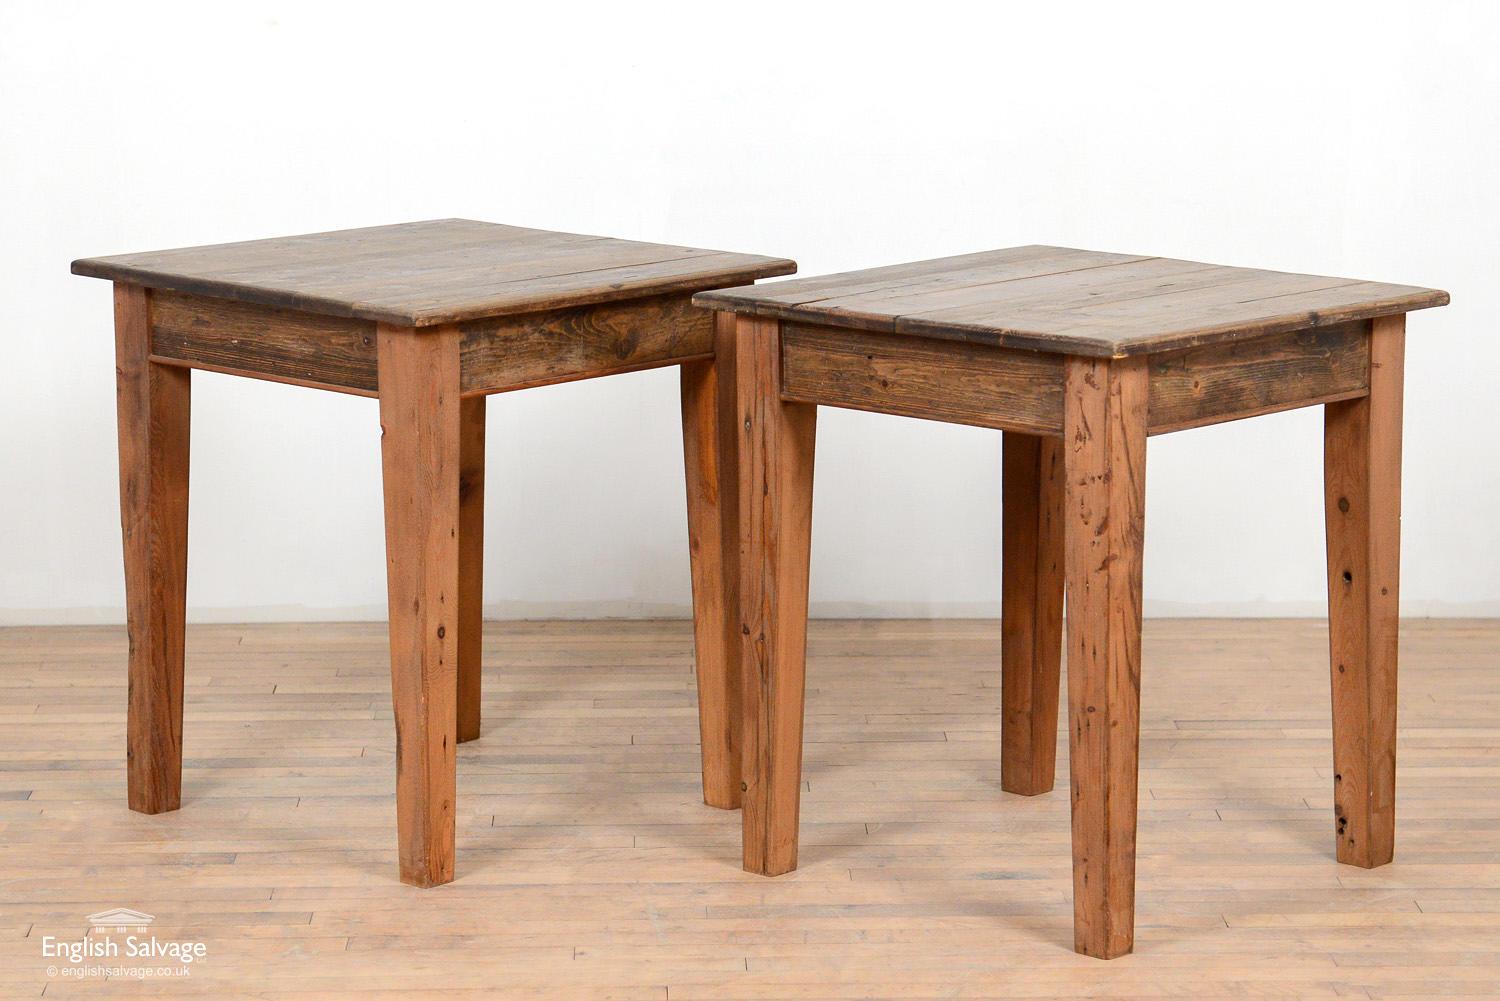 Reclaimed vintage kitchen tables made from pine with plank tops, a single bead around the bottom of the apron / sides of the table and slightly tapered legs. Approximate size of each below. Both have a few dings and scratches from past use.